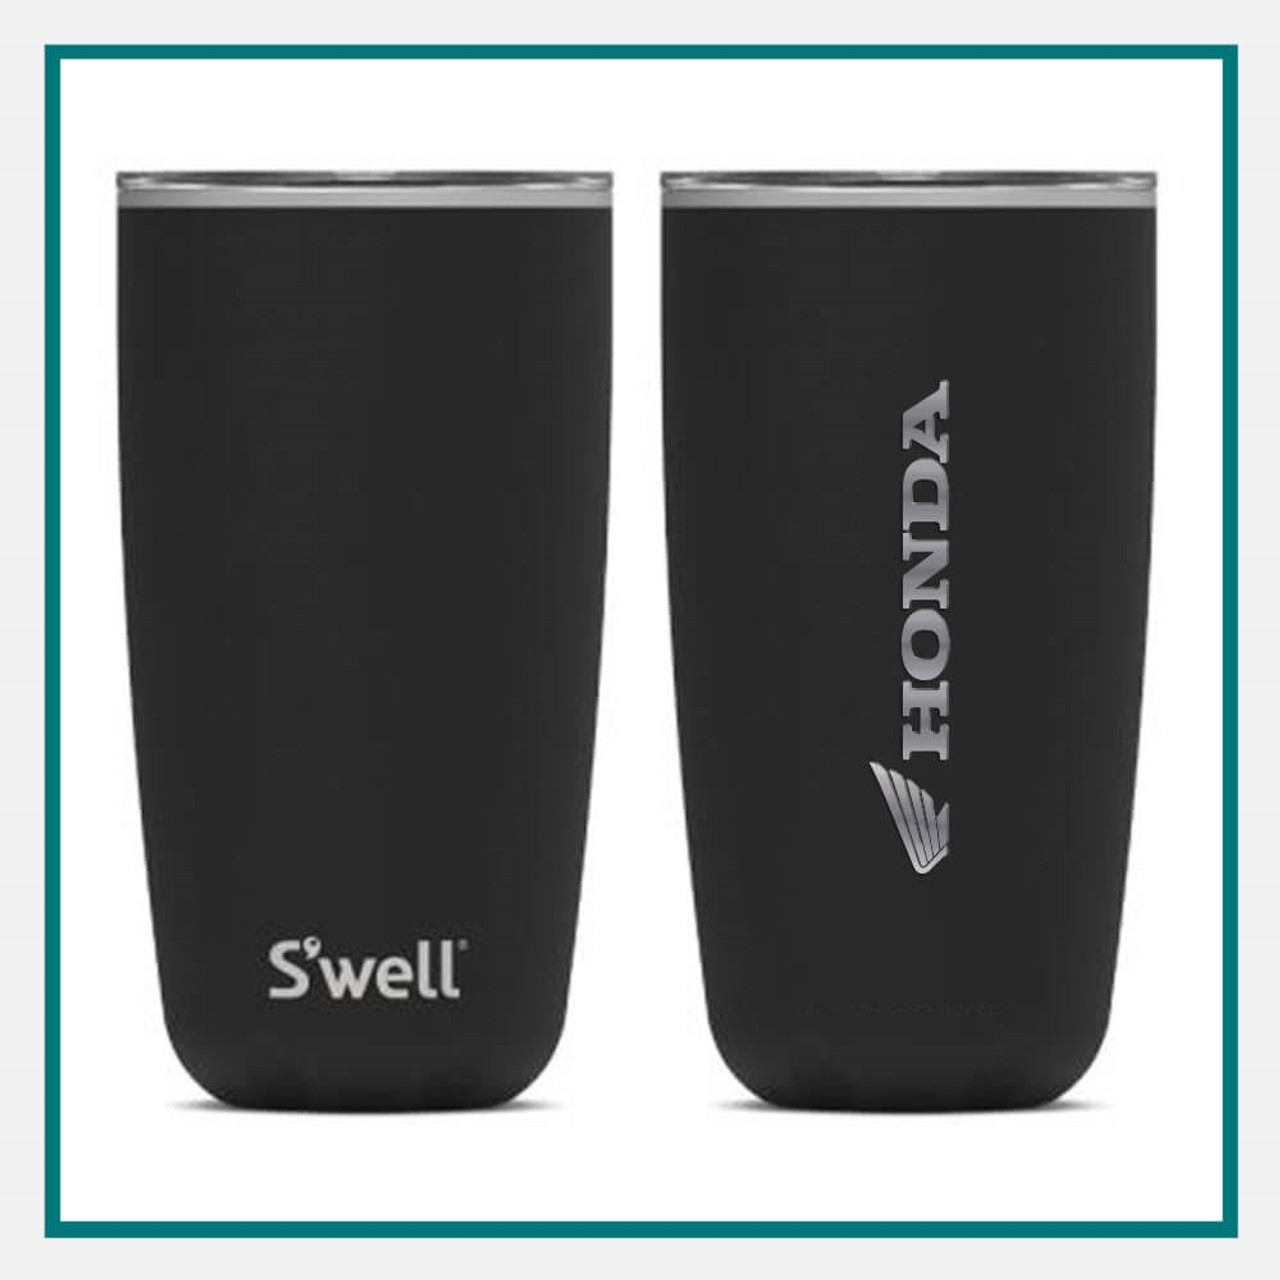 S'well 25oz Stainless Steel Bottle - Wood/Blonde